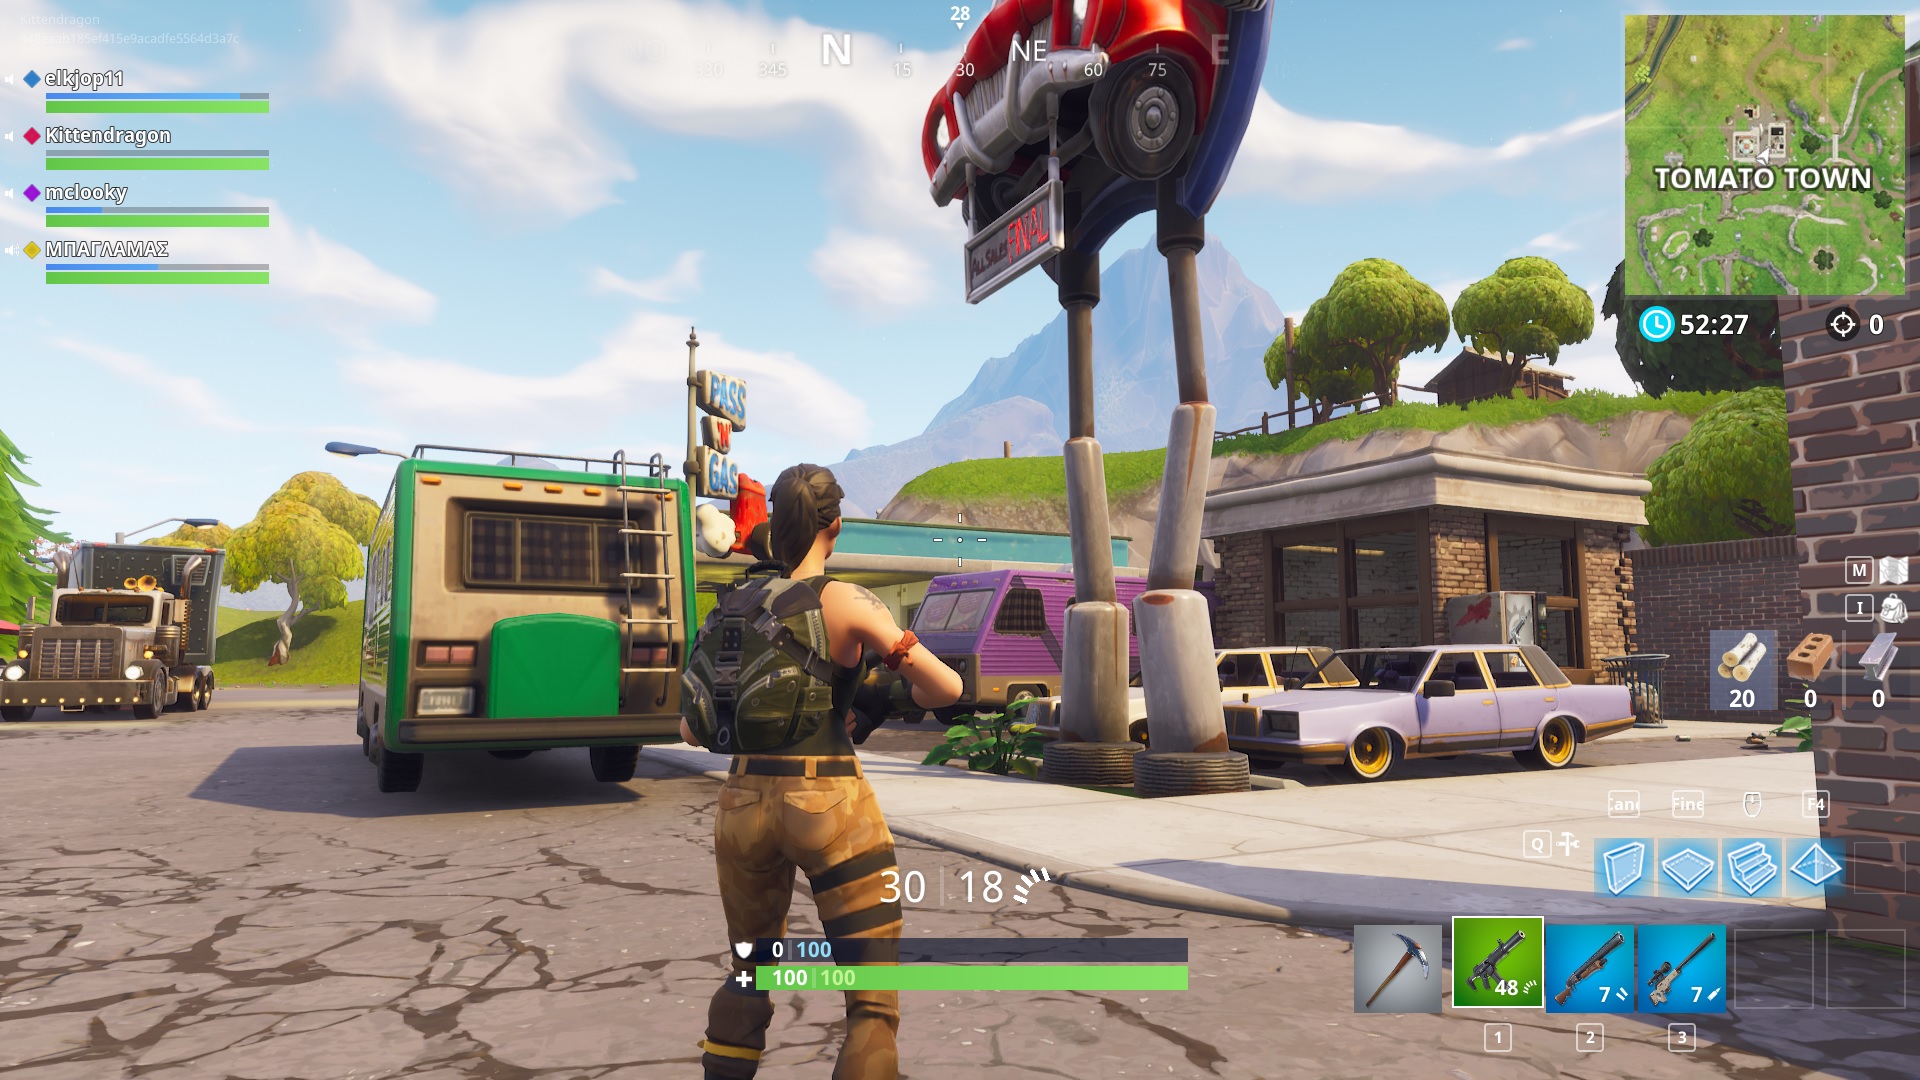 Media asset (photo, screenshot, or image in full size) related to contents posted at 3dfxzone.it | Image Name: Fortnite_Screenshot_1.jpg